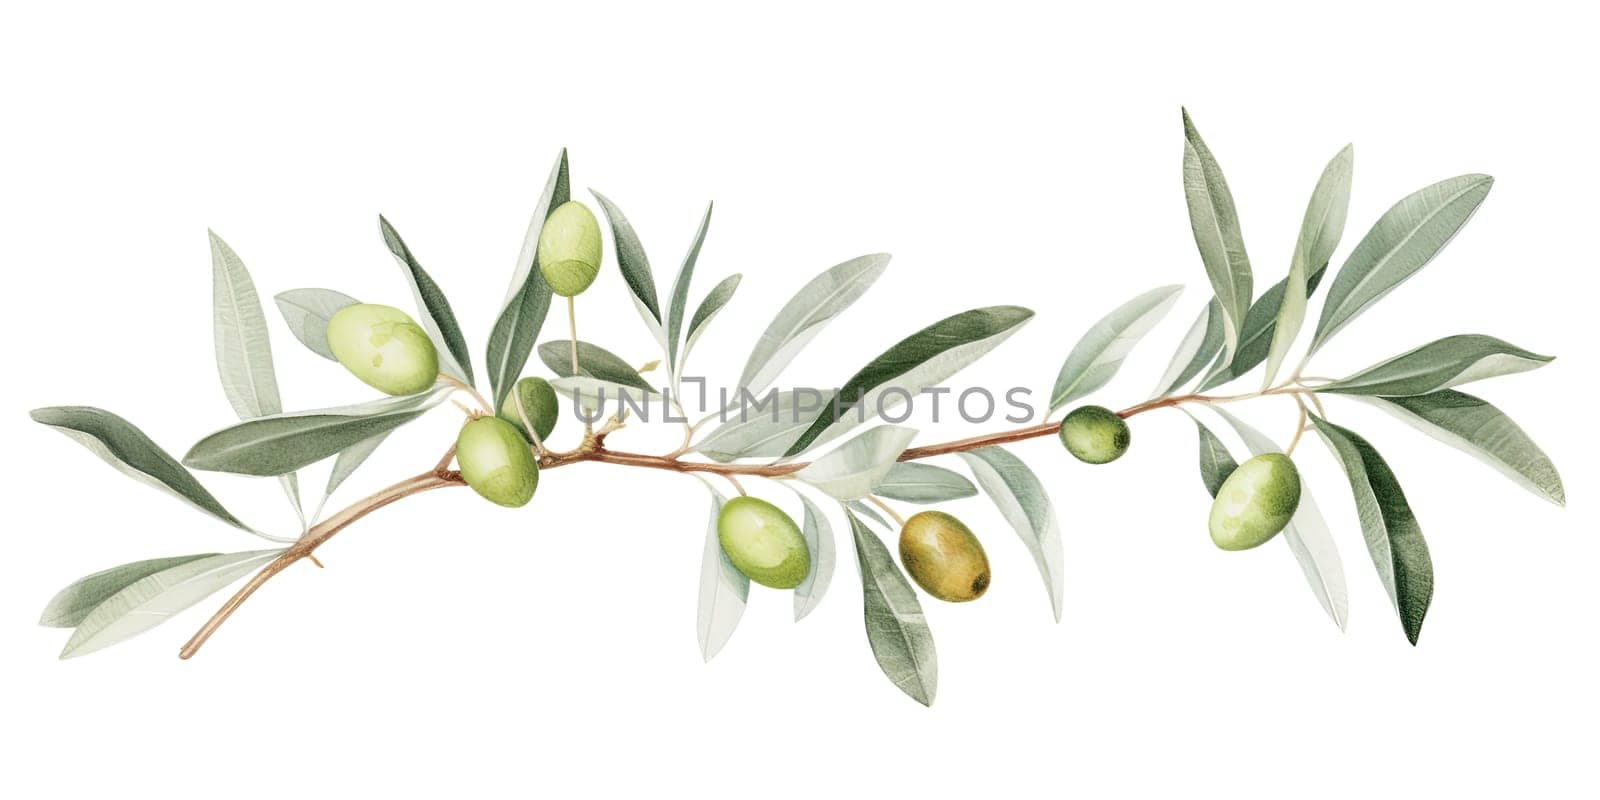 Illustration Done In Watercolor, Showcasing Green Olive Leaves Against A White Background